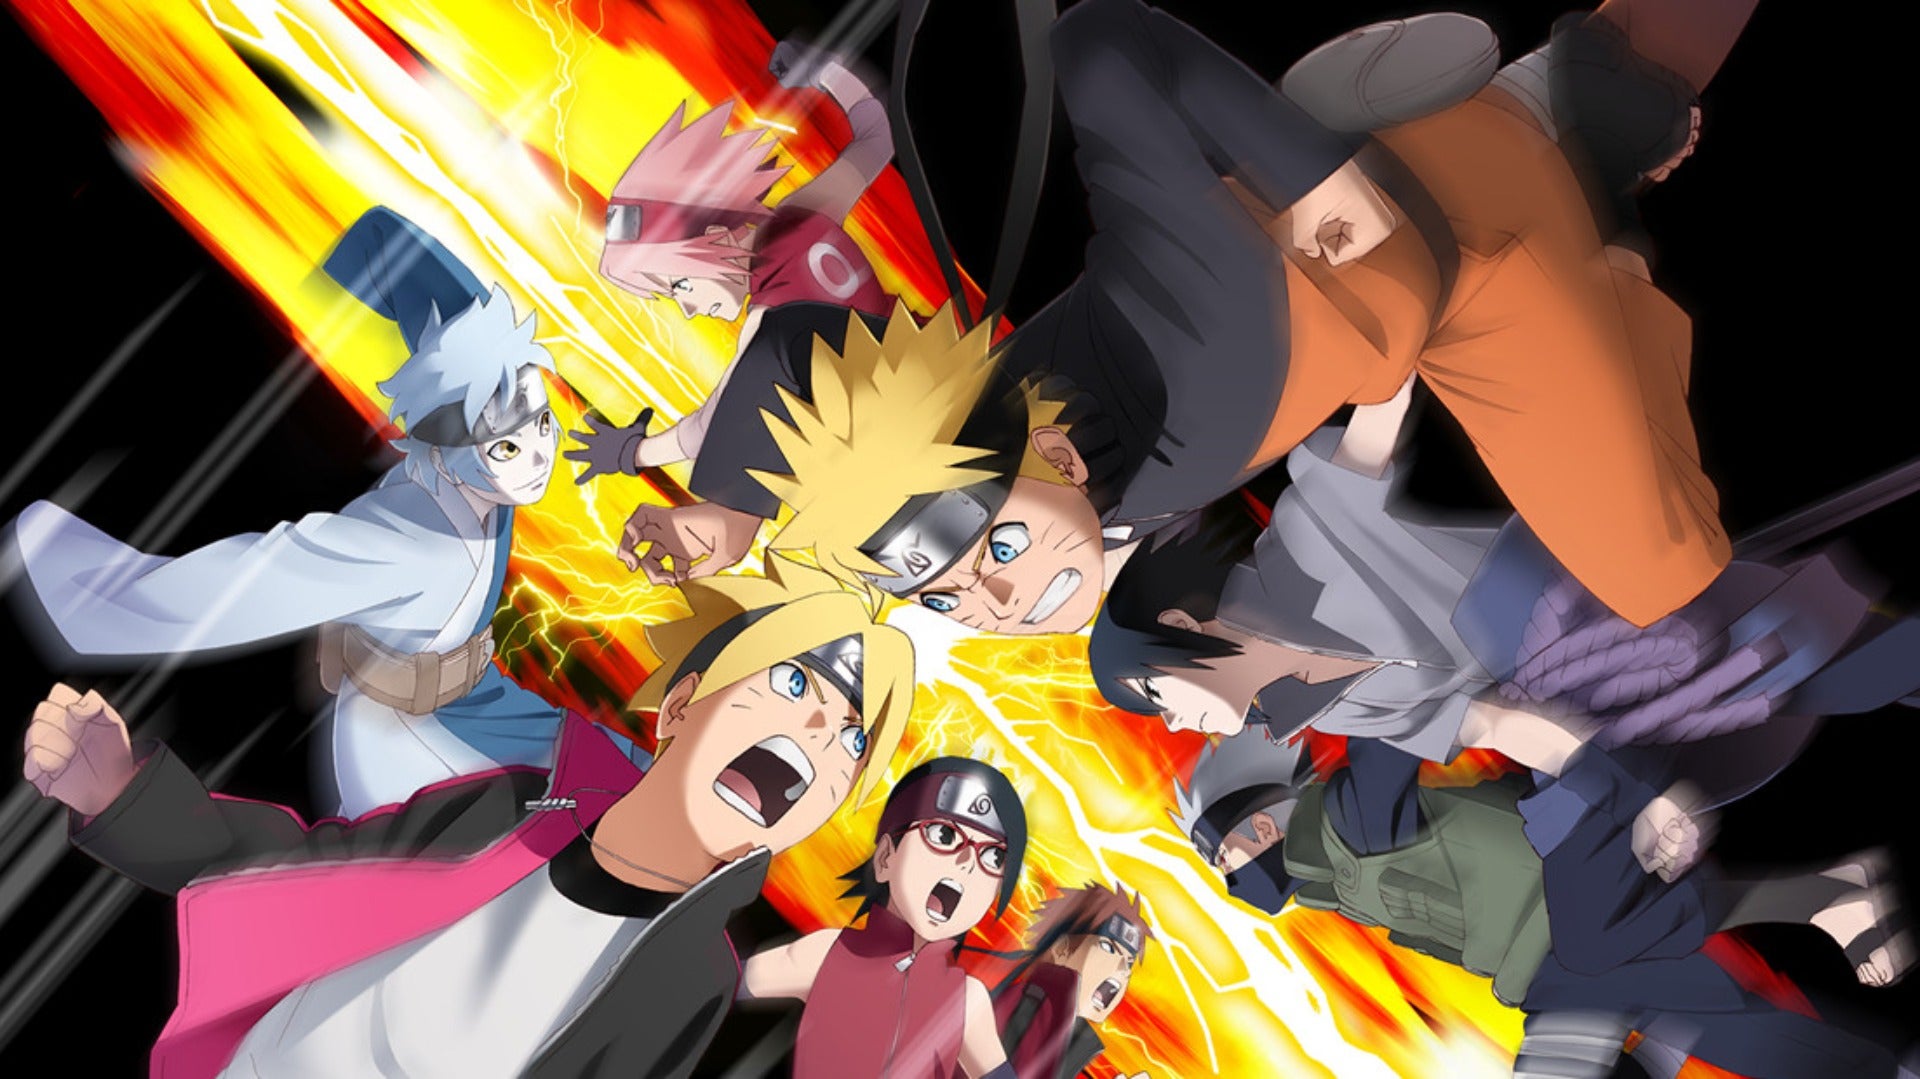 10 best Roblox games for fans of Naruto